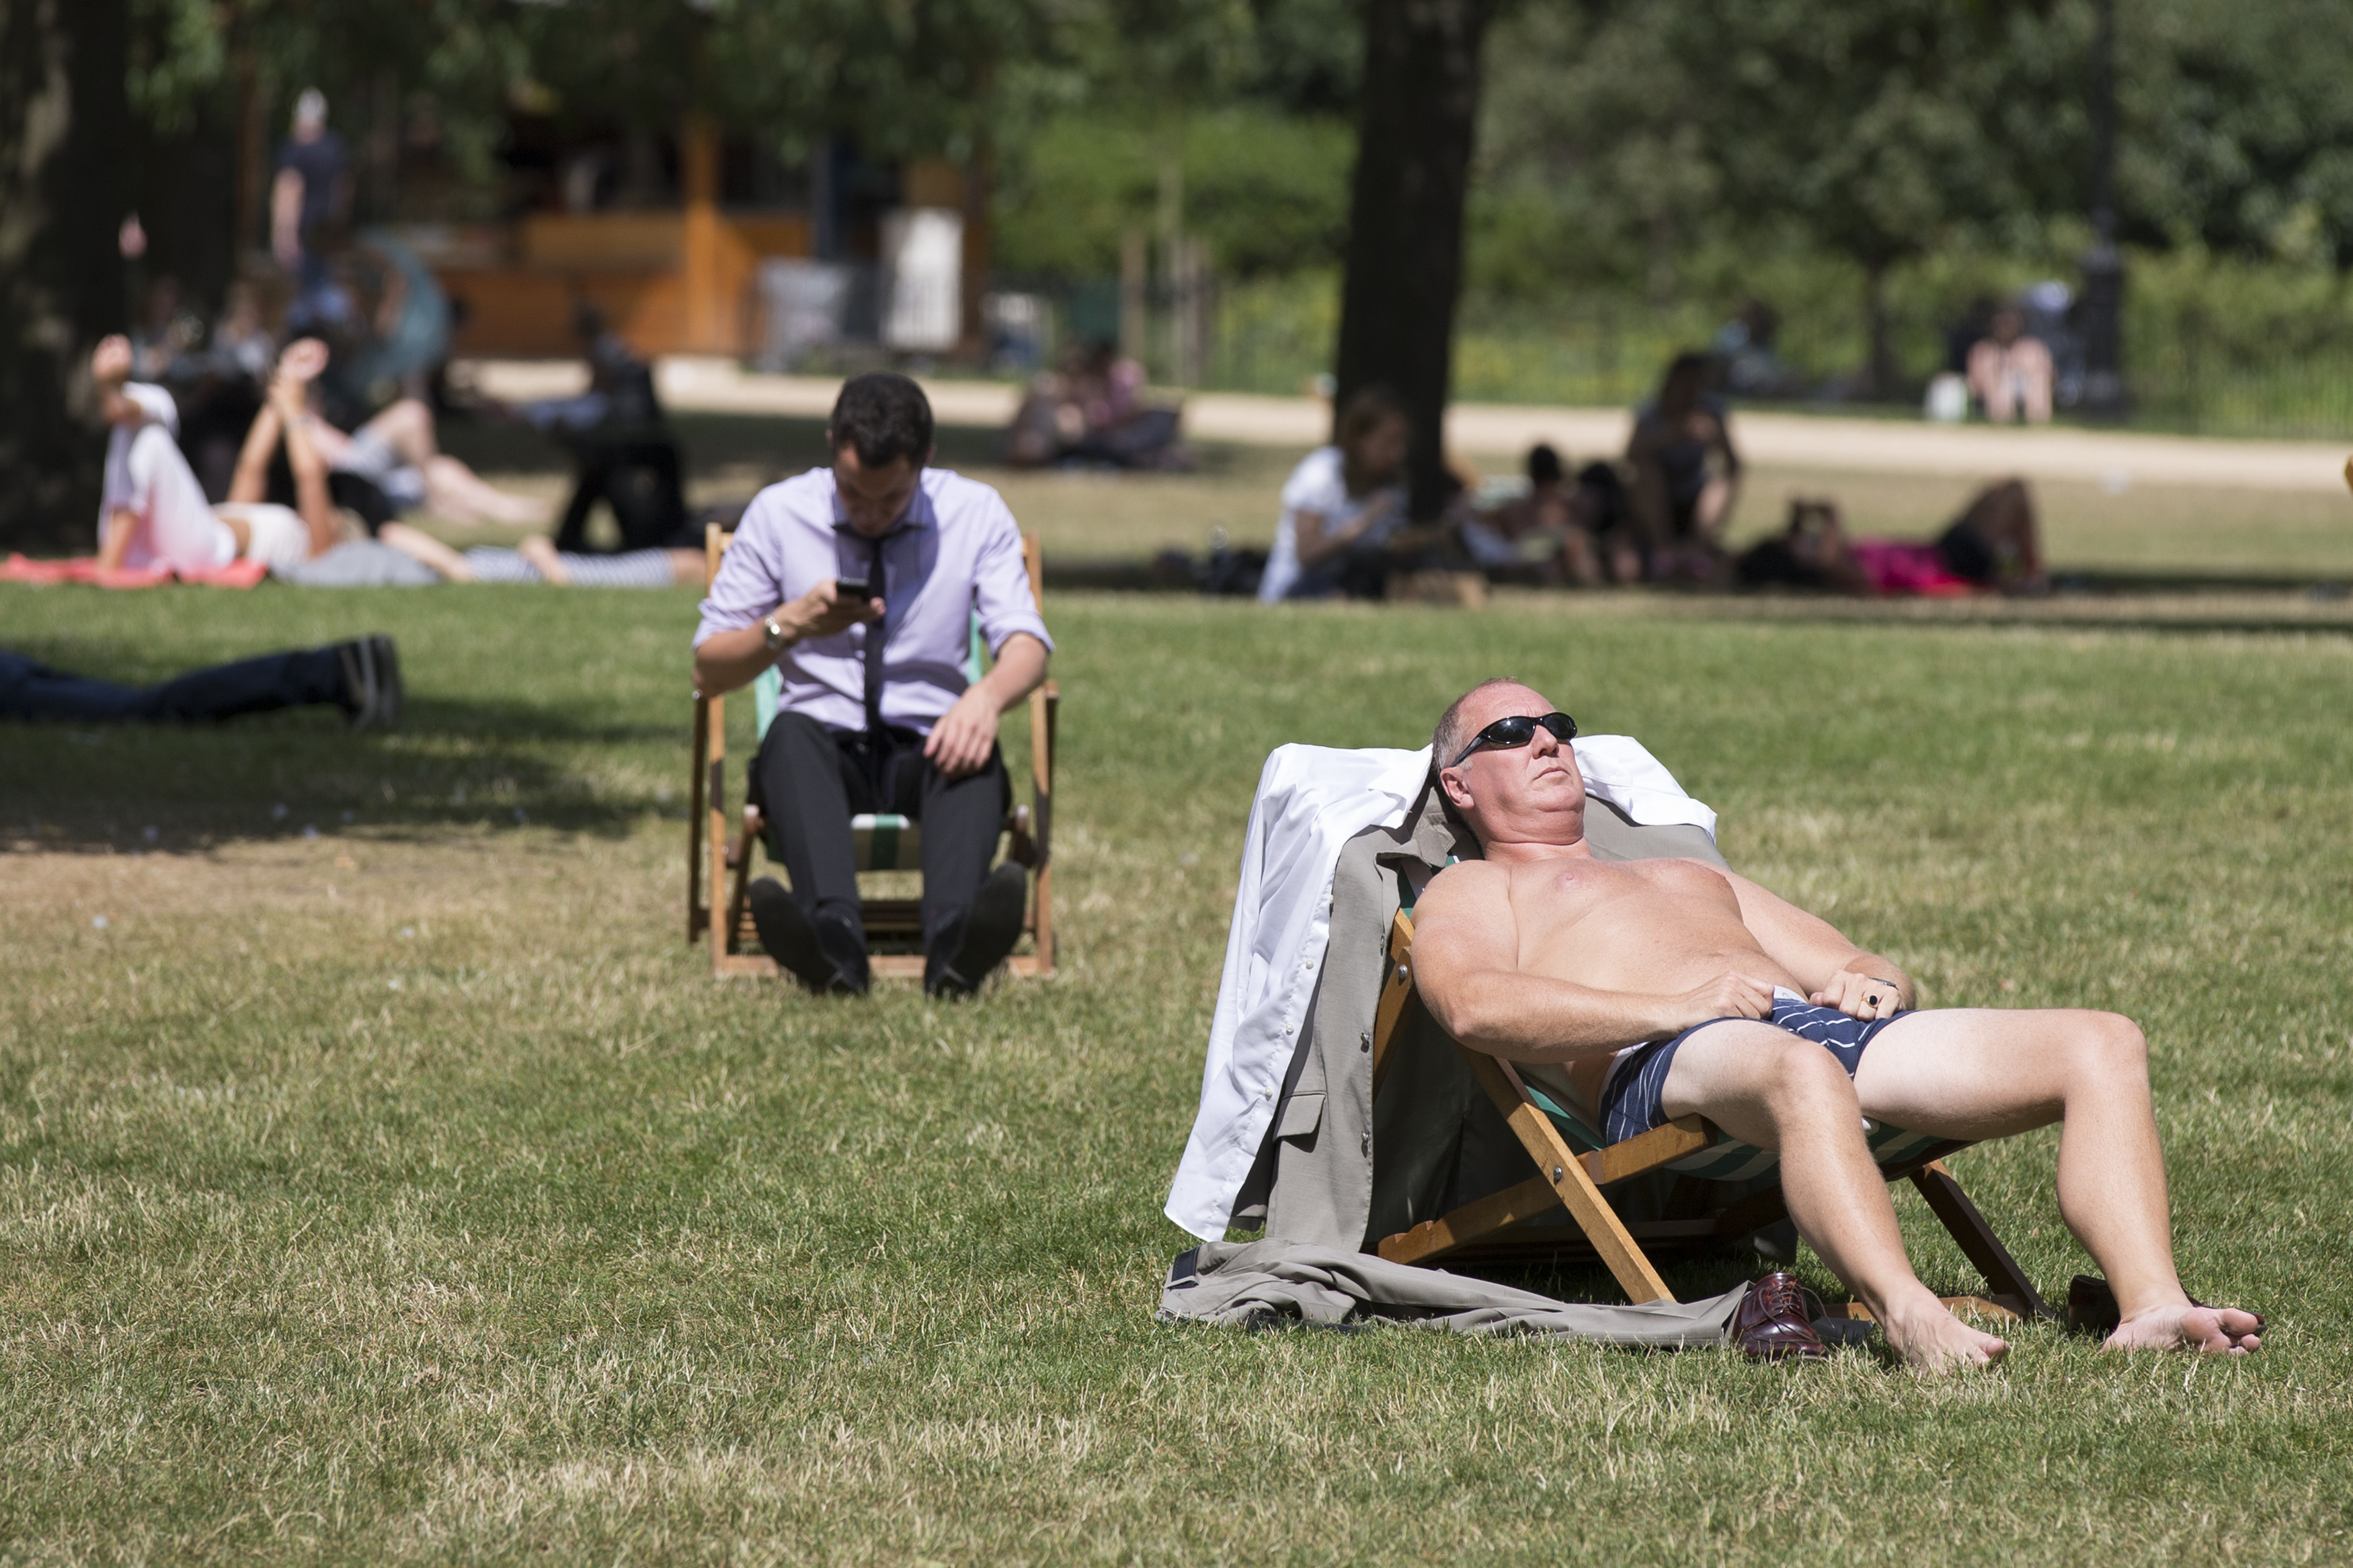 Too hot to work, Britons de-suit in the park instead during a London heatwave. Photo: Getty Images